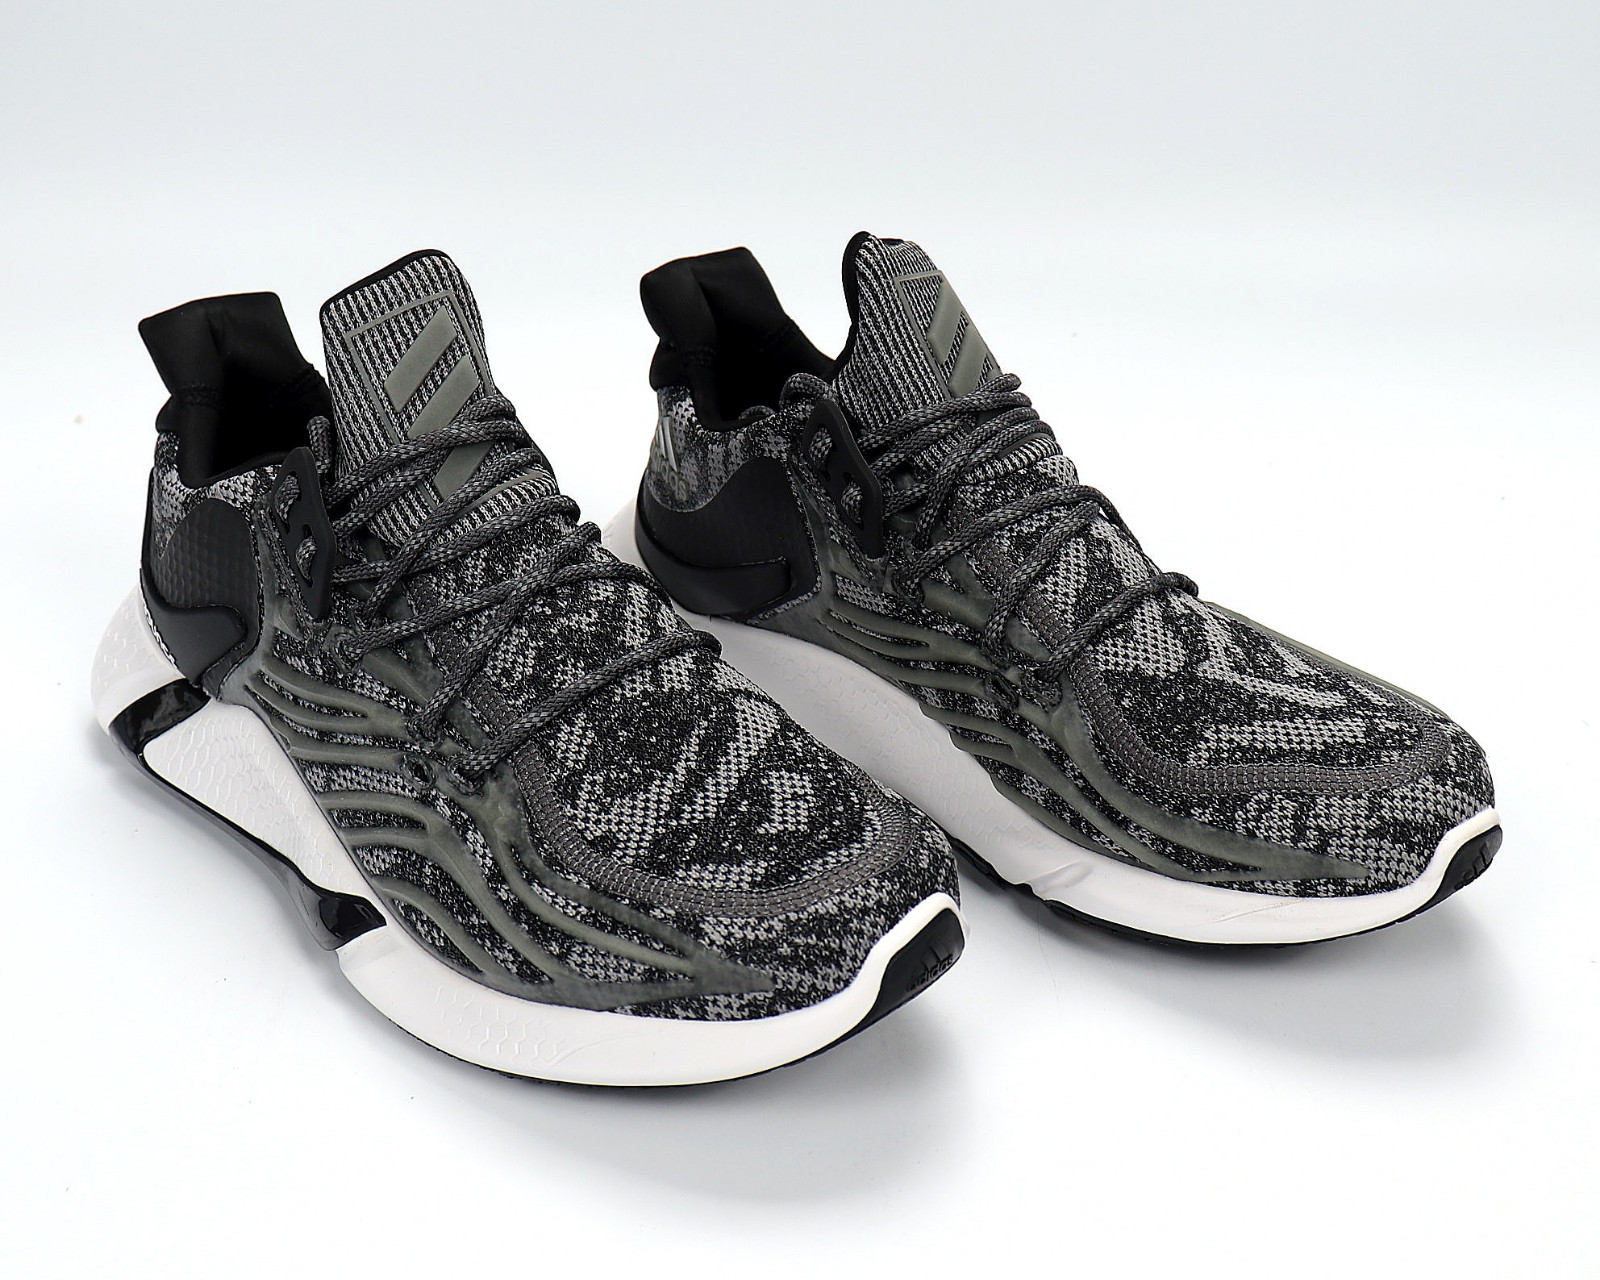 Adidas AlphaBounce x Yeezy Boost Core Black Cloud White Running Shoes ...